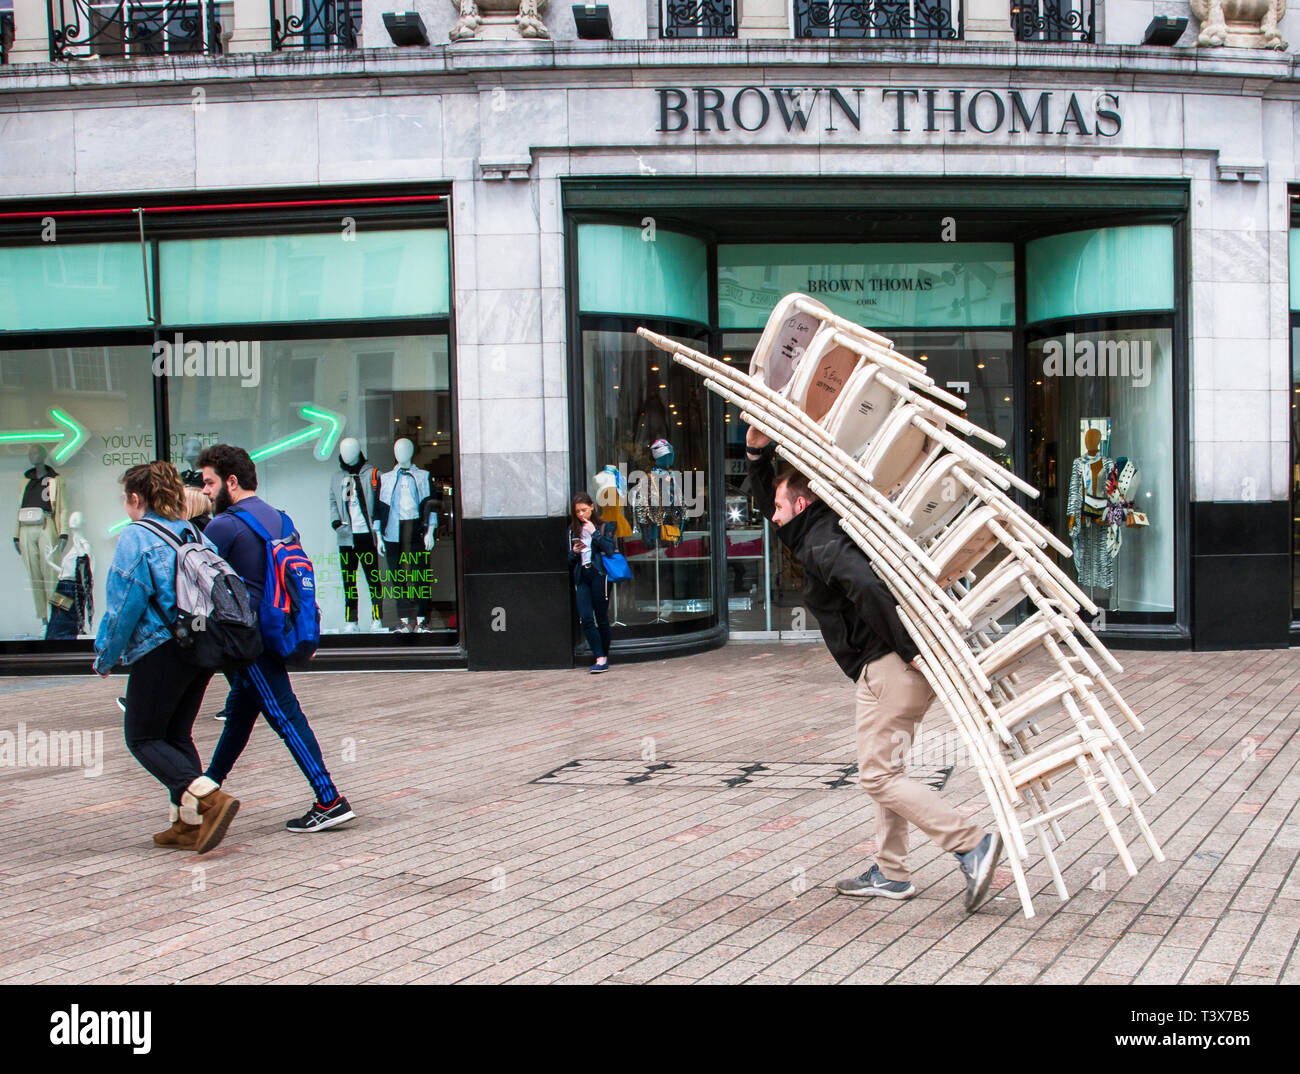 Cork City, Cork, Ireland. 12th April, 2019. David O' Driscoll, Kilkully carrying chairs down Patrick's Street for delivery to the Brown Thomas department Store in Cork, Ireland. Credit: David Creedon/Alamy Live News Stock Photo